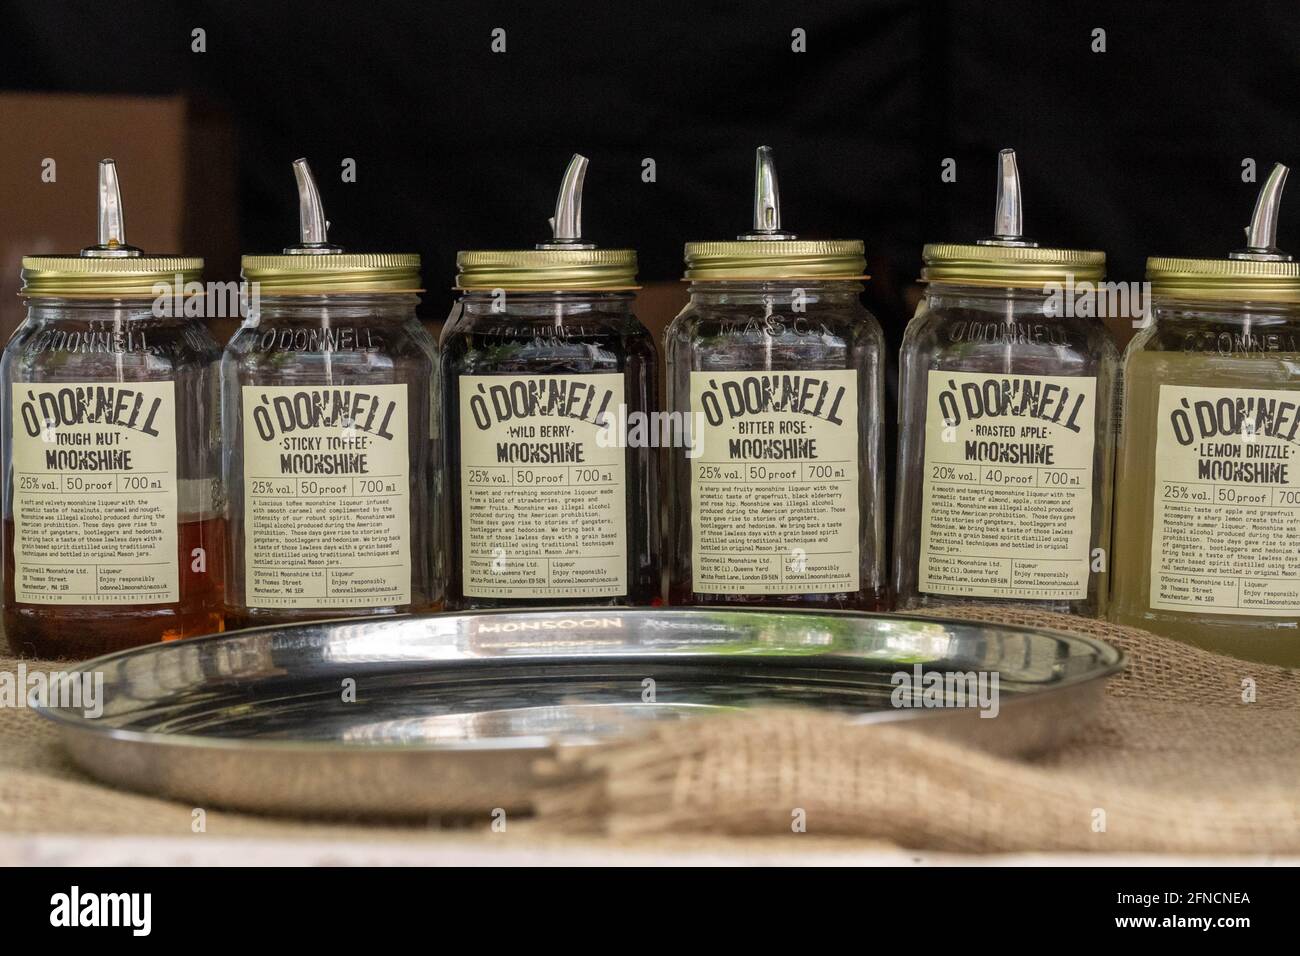 Brentwood Essex 16th May 2021 Vegan Street Market in Brentwood Essex O'donnell moonshine, Credit: Ian Davidson/Alamy Live News Stock Photo